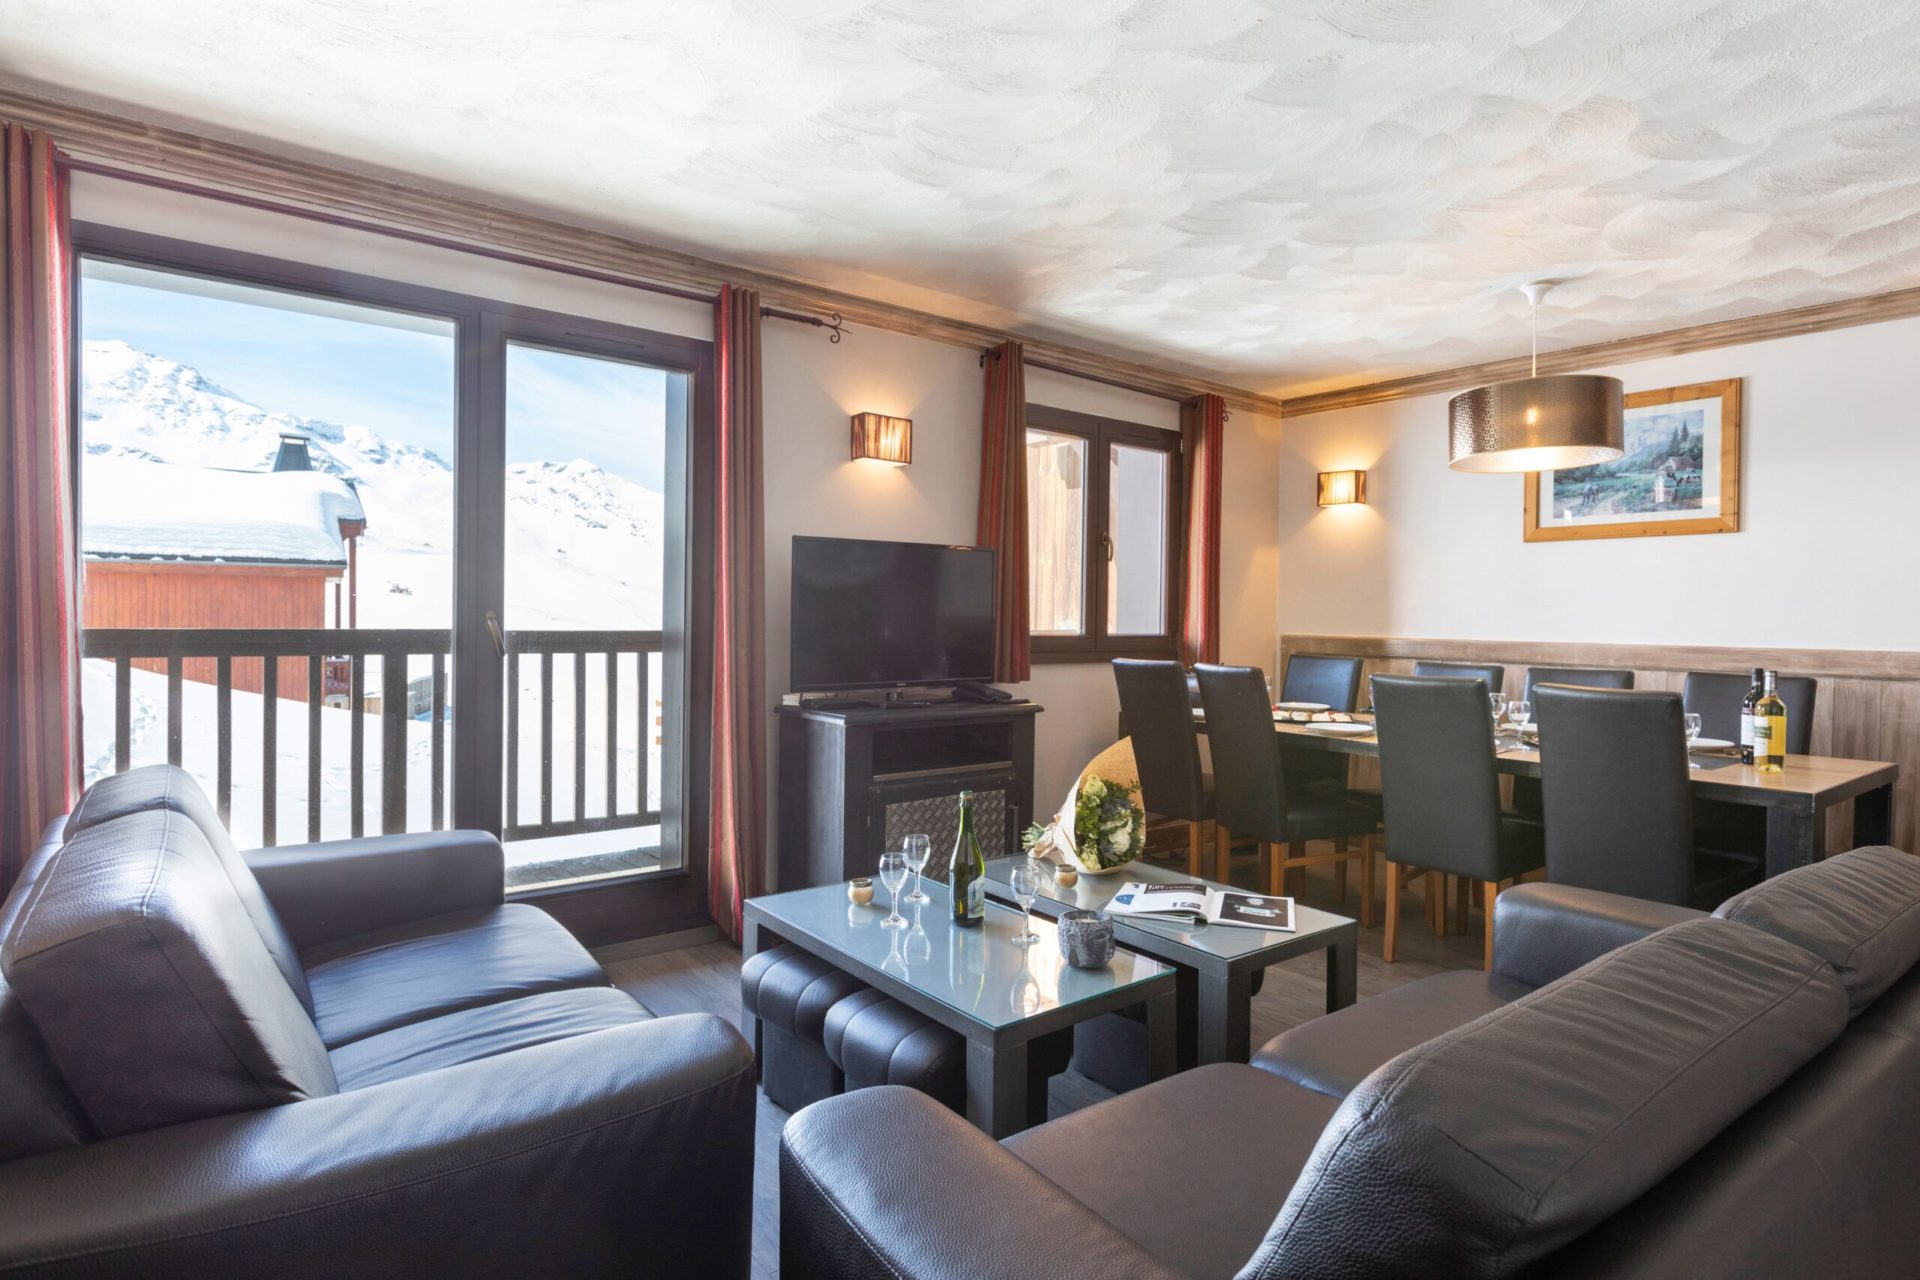 An image of one of the living area at Chalet des Neiges Residence Hermine